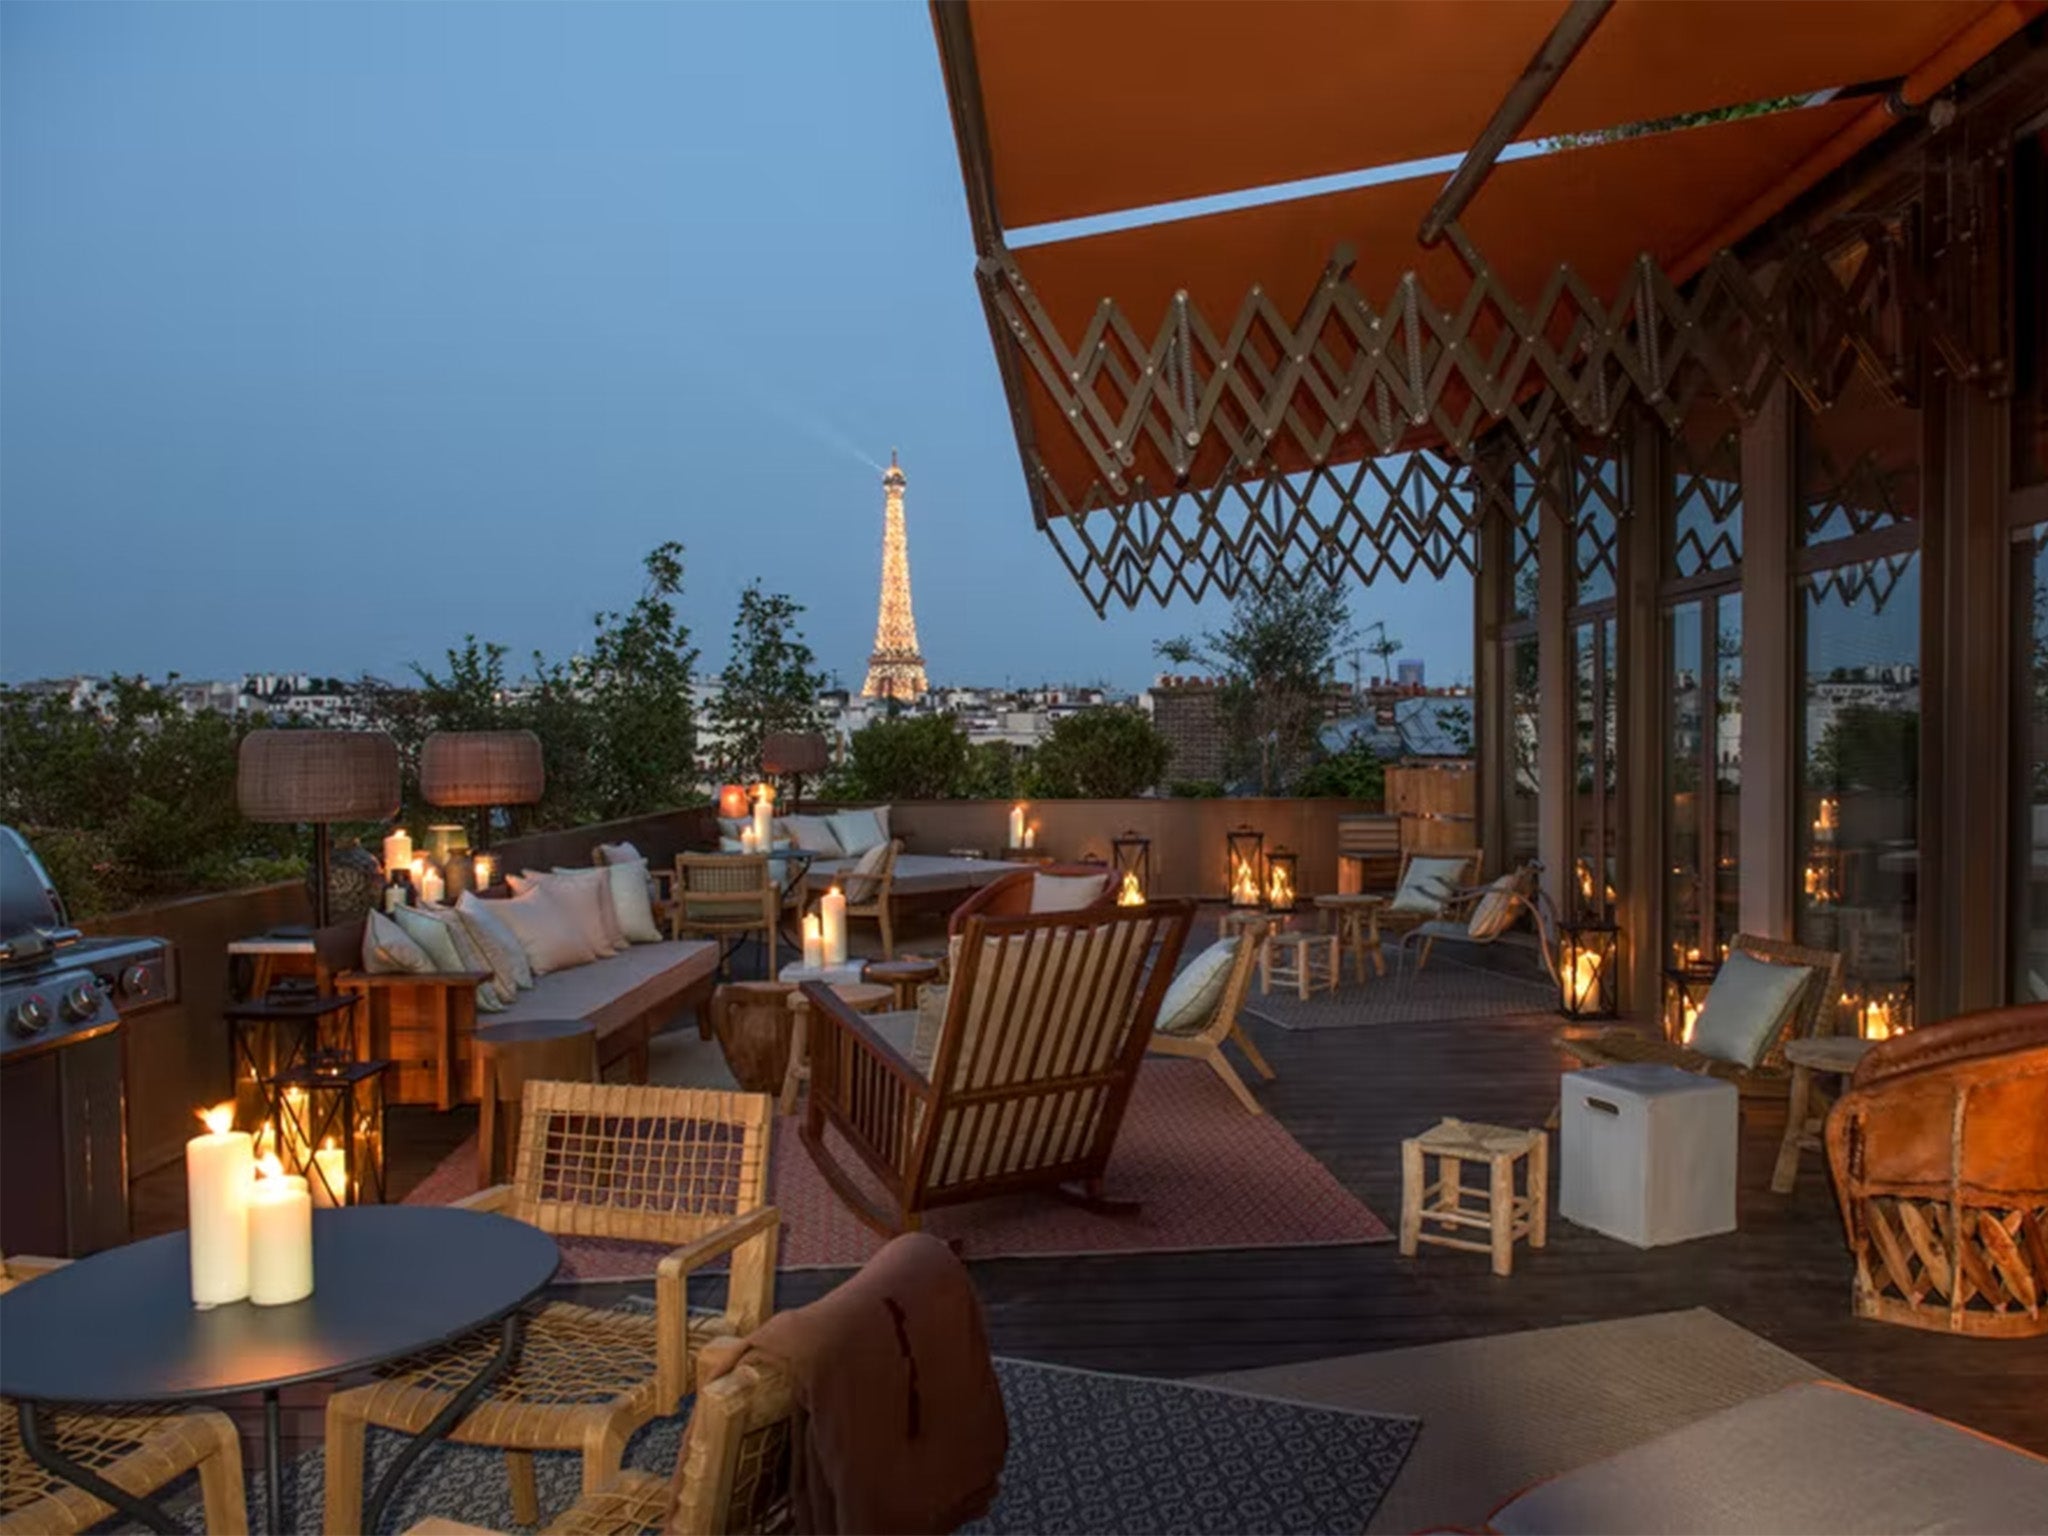 <p>Soak up the superb views of the Eiffel Tower on the rooftop of Brach Paris</p>